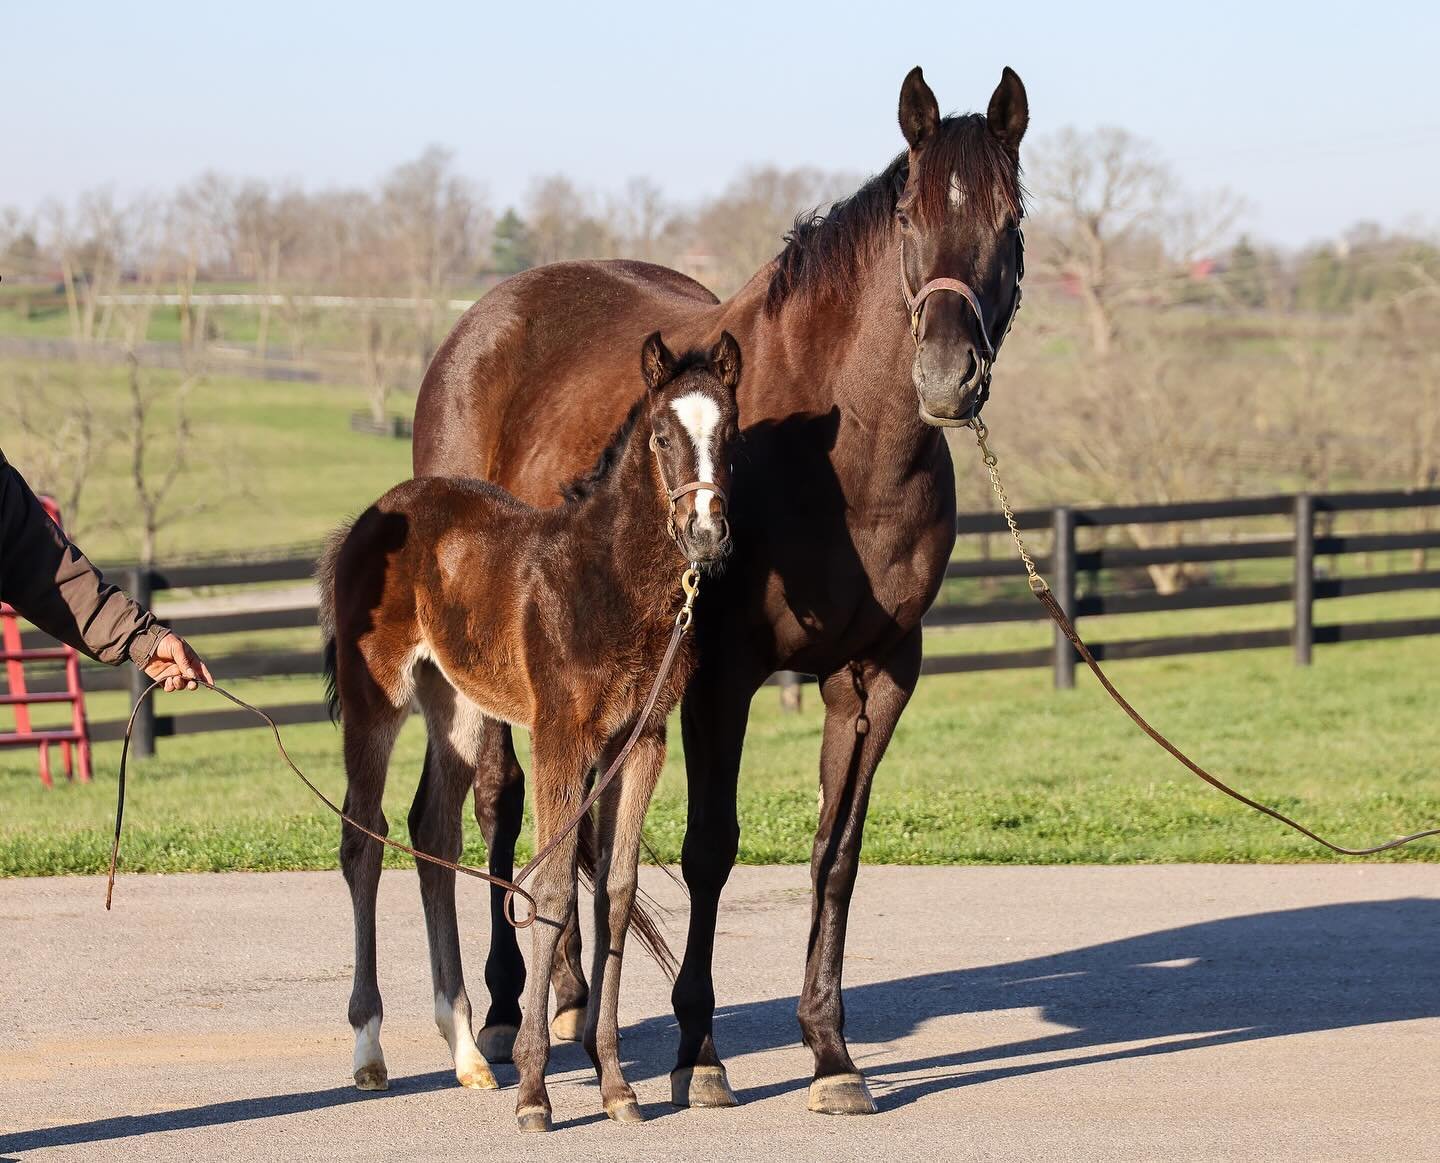 A happy foal Friday brought to you today by Daddy is a Legend and her second foal, a filly by Medaglia d&rsquo;Oro foaled Feb 24th 💗

Daddy is a Legend, a G3 winner, owned by Jim and Susan Hill foaled her first foal last year, a colt by a Curlin and